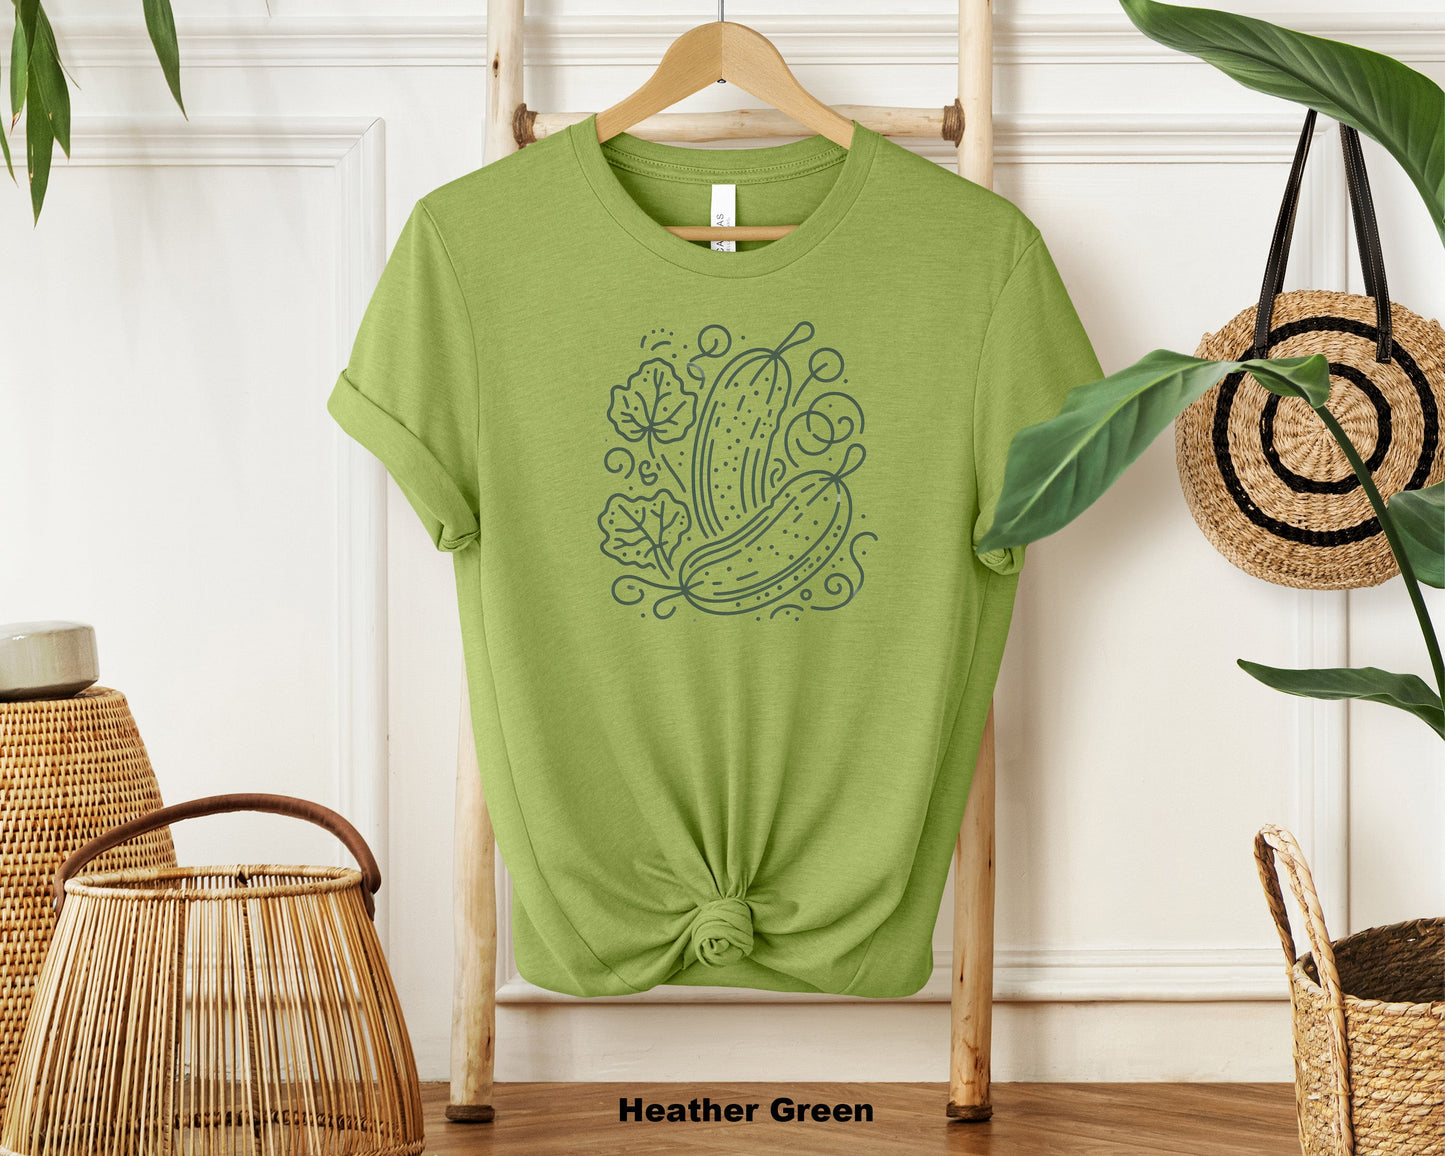 Dill-icious Pickle Crewneck Tee - Fun and Flavorful Pickle Lover Shirt